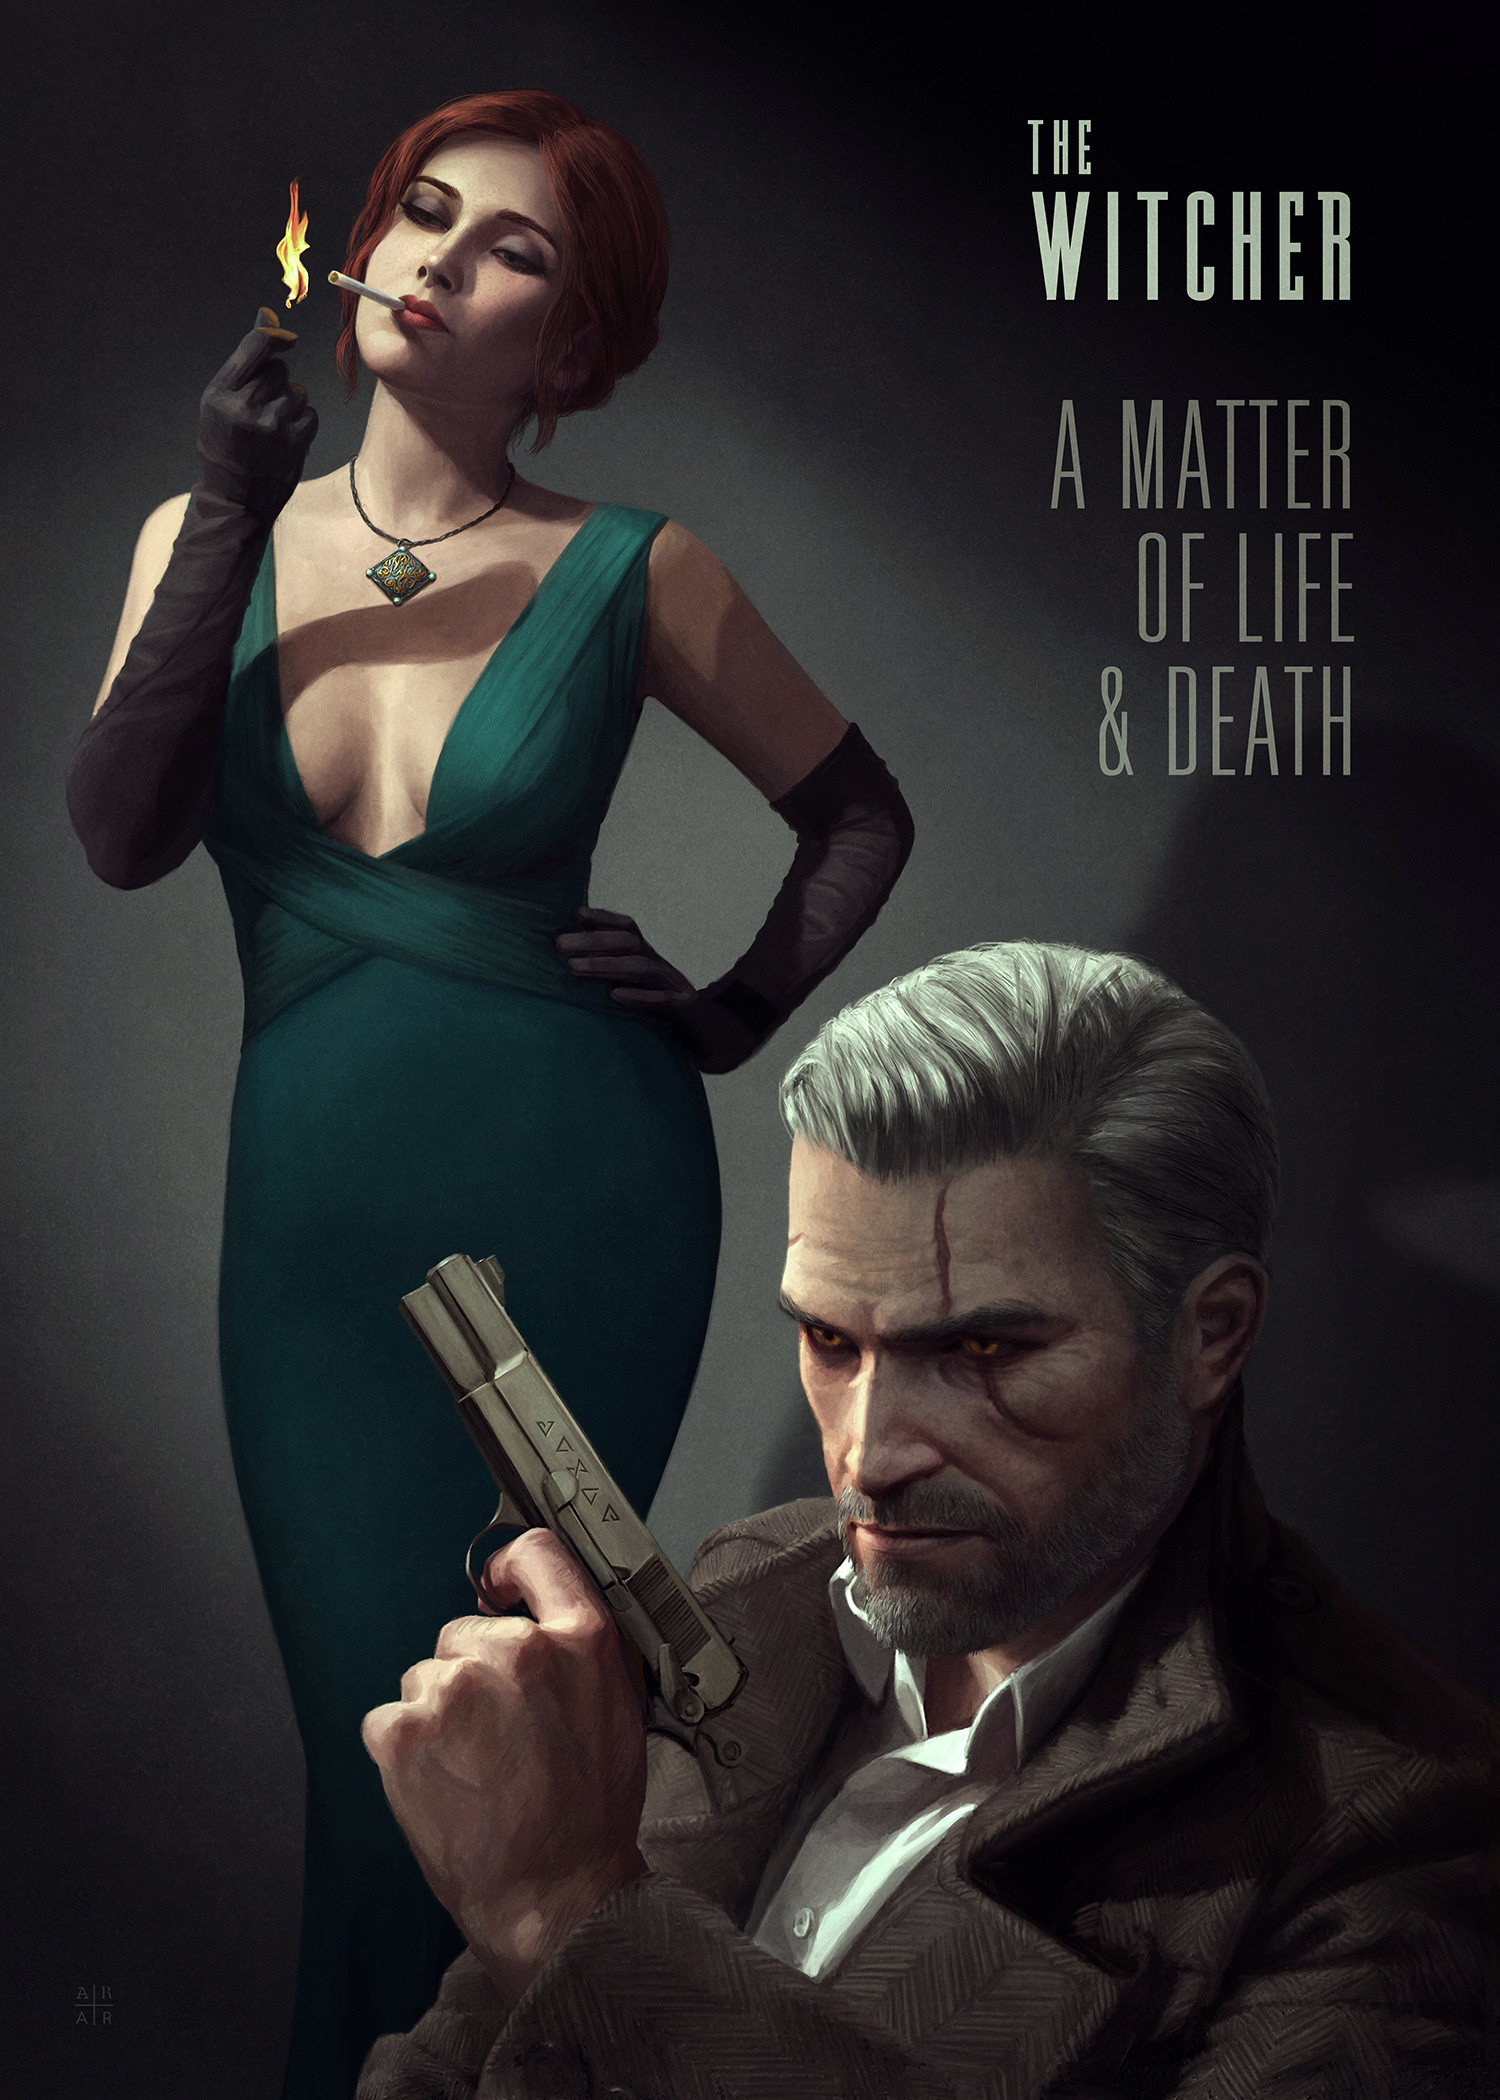 Fine Art: The Witcher 3 And Nintendo Games Are Just Pulp Fiction